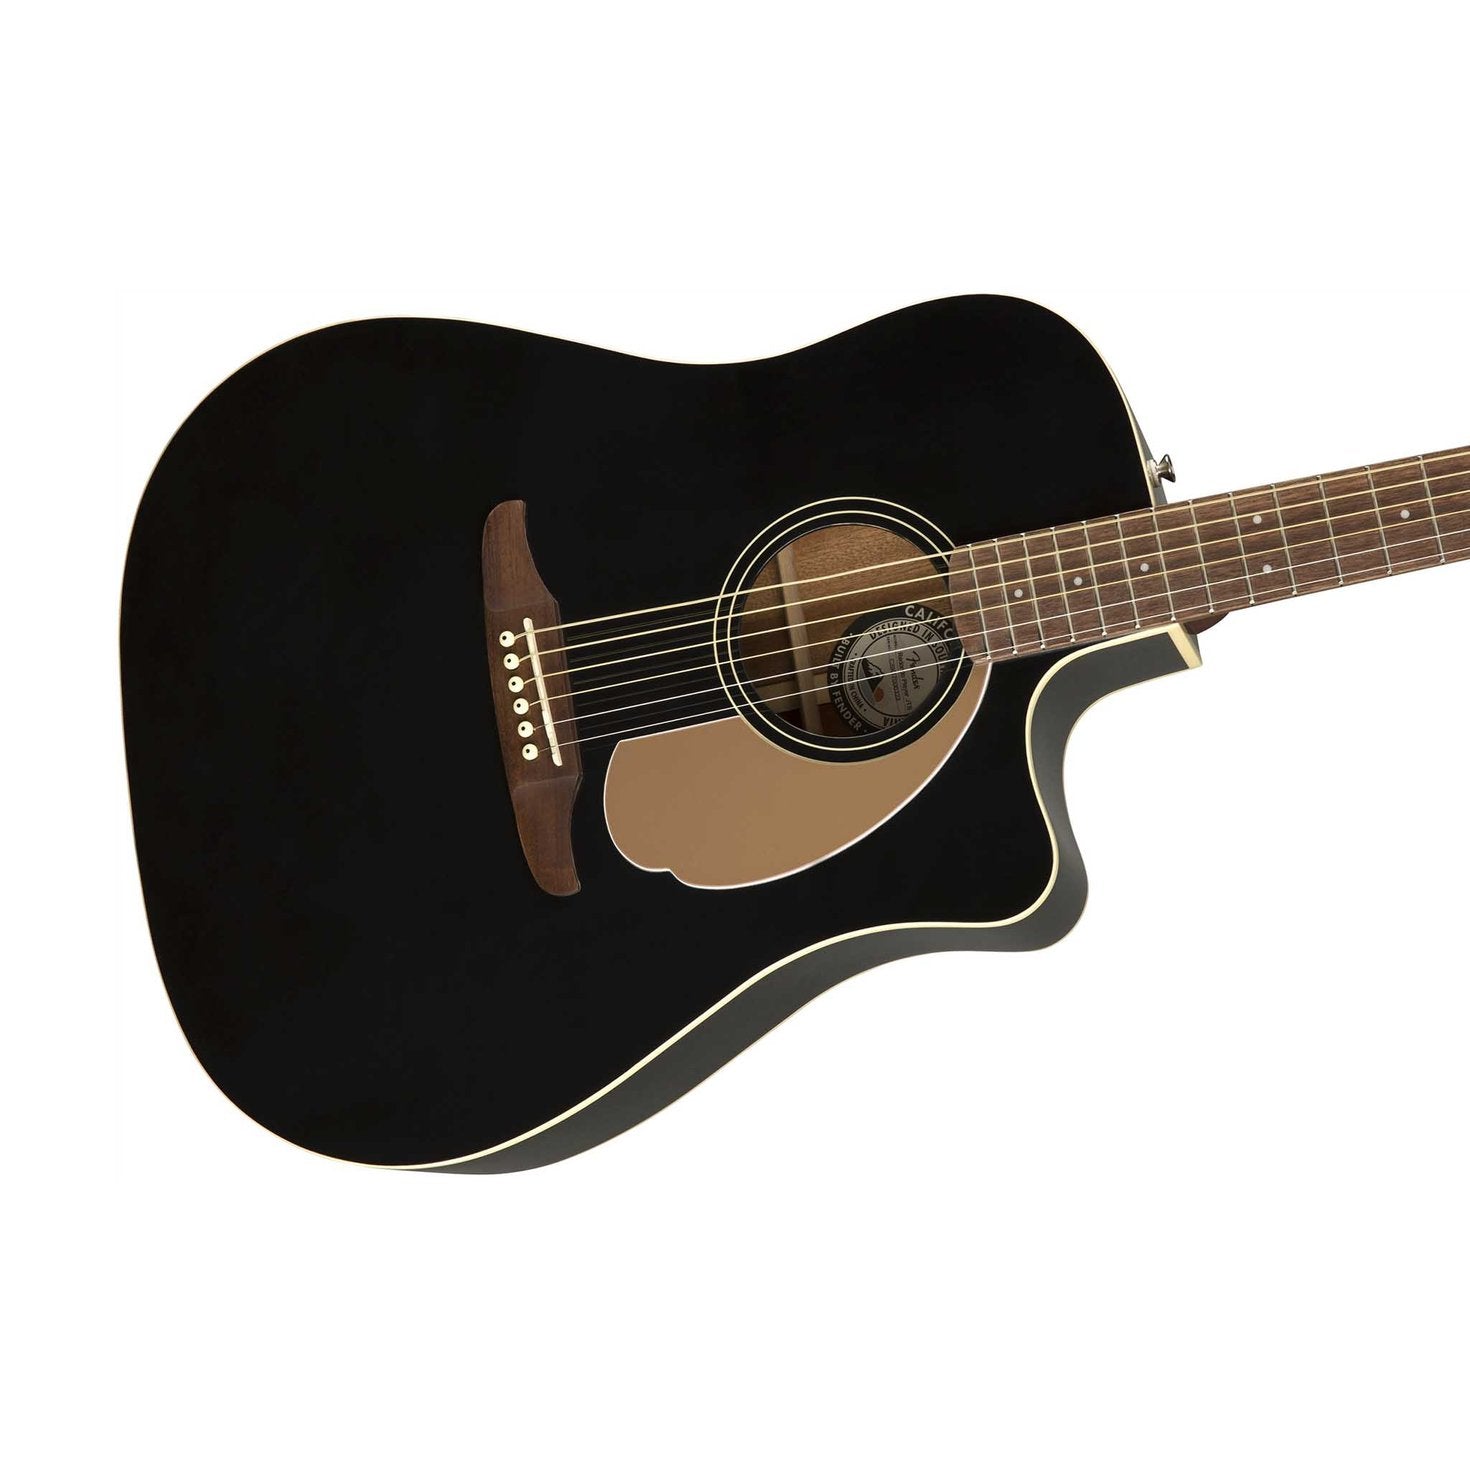 Fender Redondo Player Slope-Shouldered Acoustic Guitar, Jetty Black, FENDER, ACOUSTIC GUITAR, fender-acoustic-guitar-f03-097-0713-506, ZOSO MUSIC SDN BHD